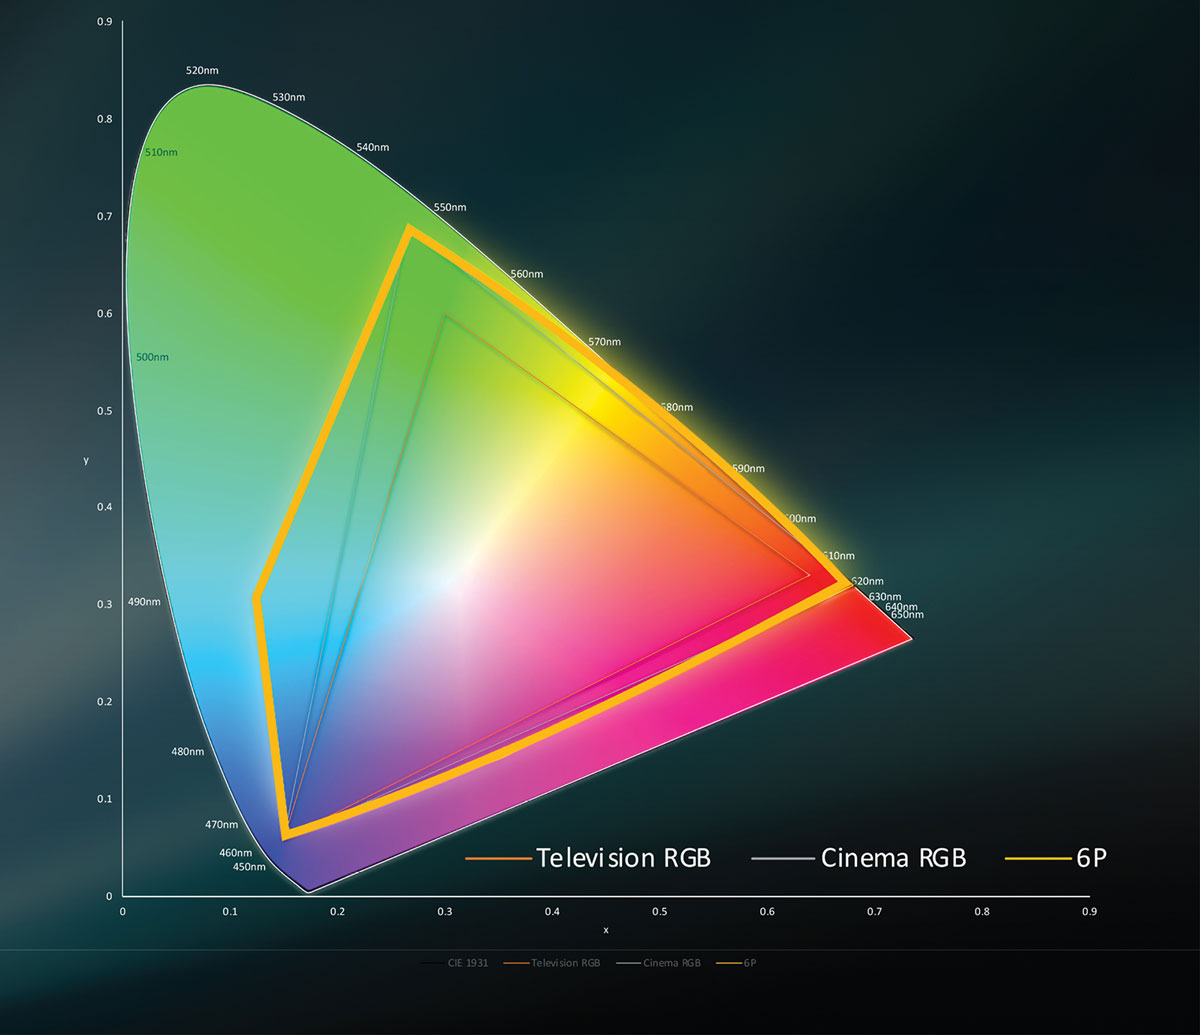 The chart above contrasts the range of visible color between current television RGB (the smallest interior triangle) to the new 6P (the largest interior shape, bordered in gold).